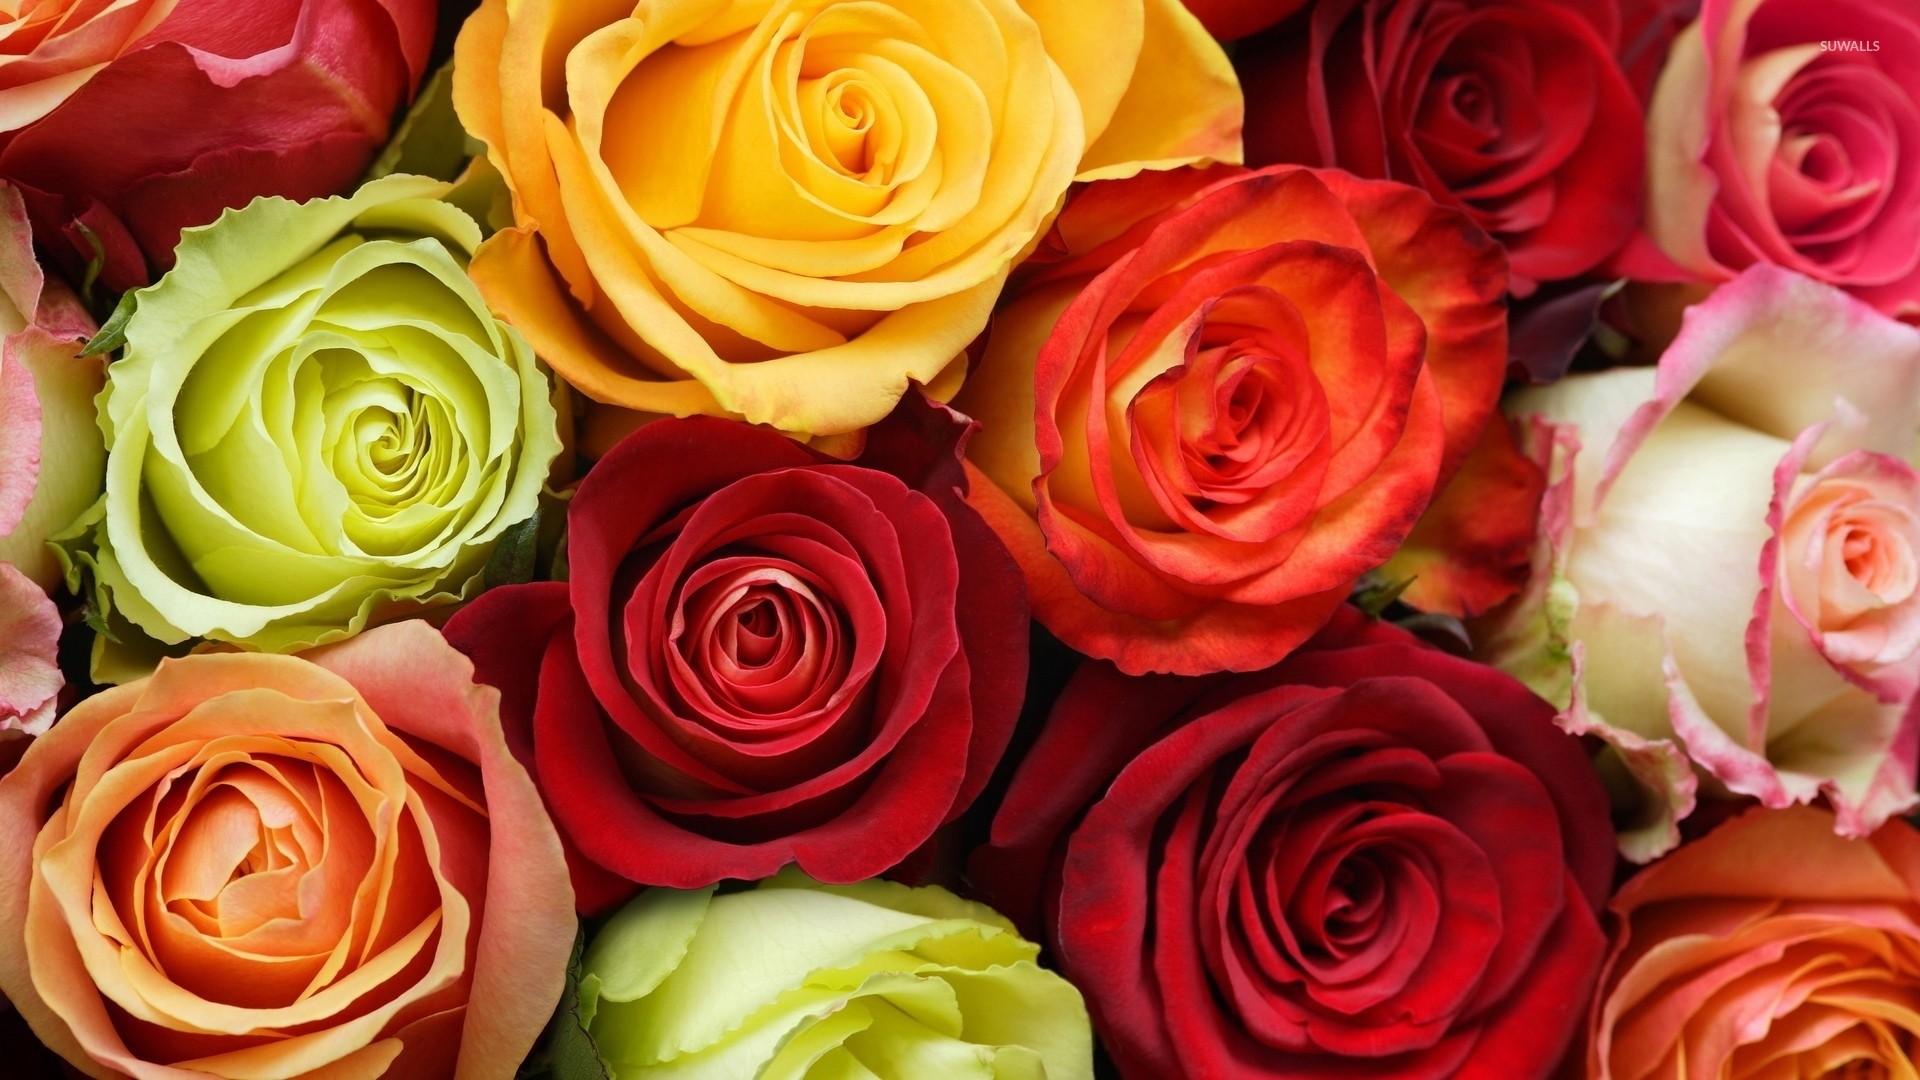 1920x1080 Explore Pretty Flowers, Hd Wallpaper, and more!